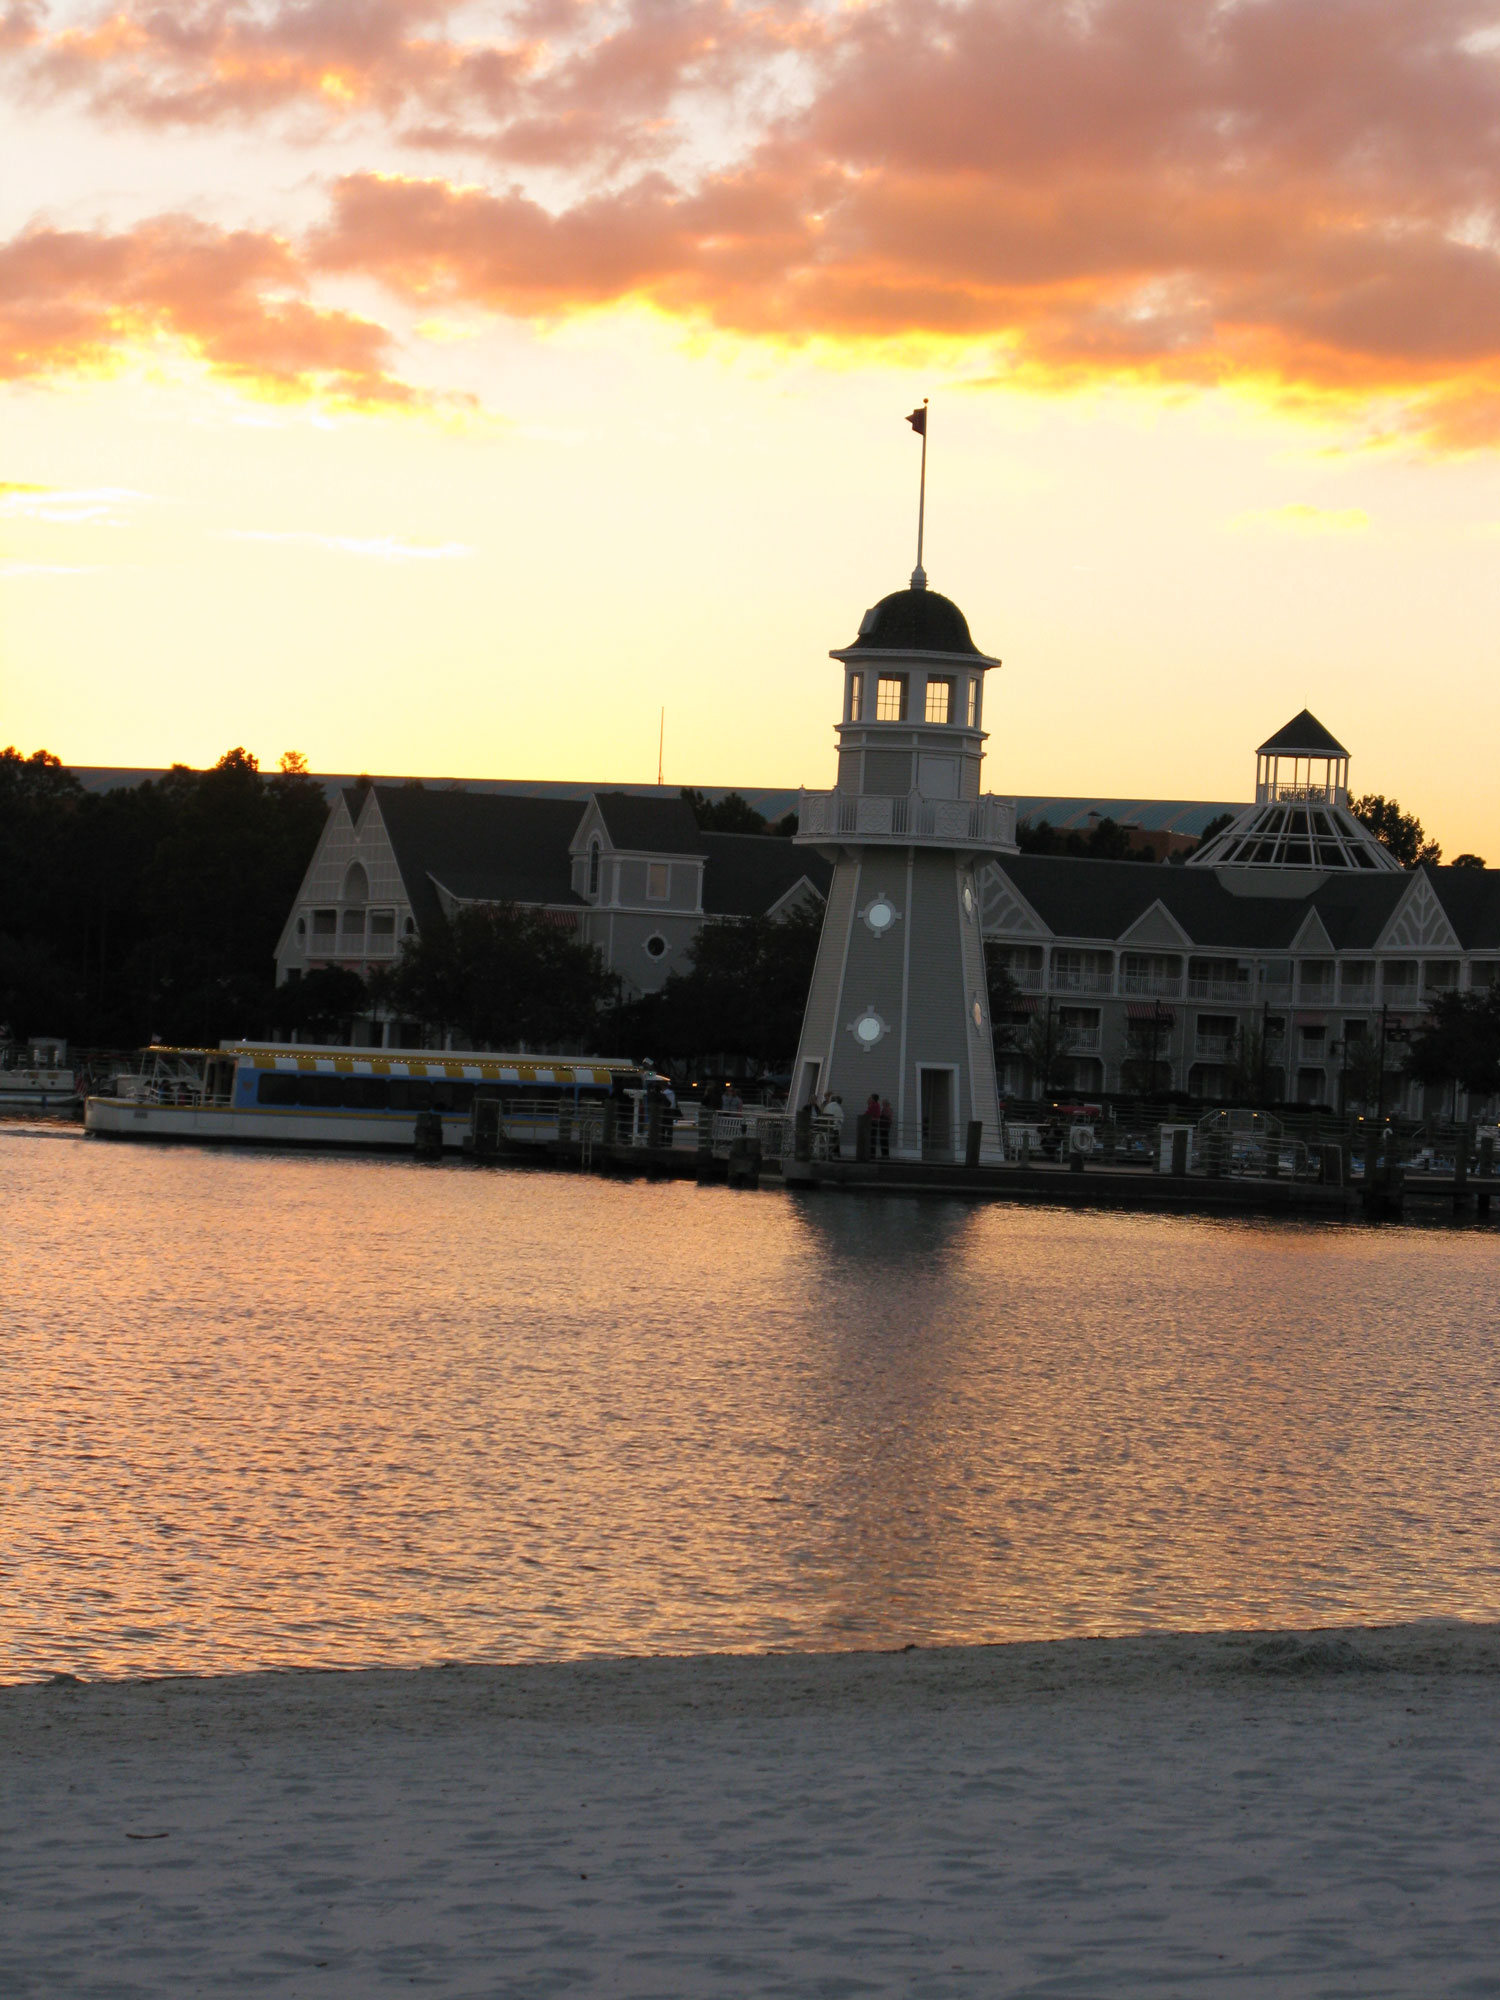 Lighthouse Pier at Yacht Club at sunset